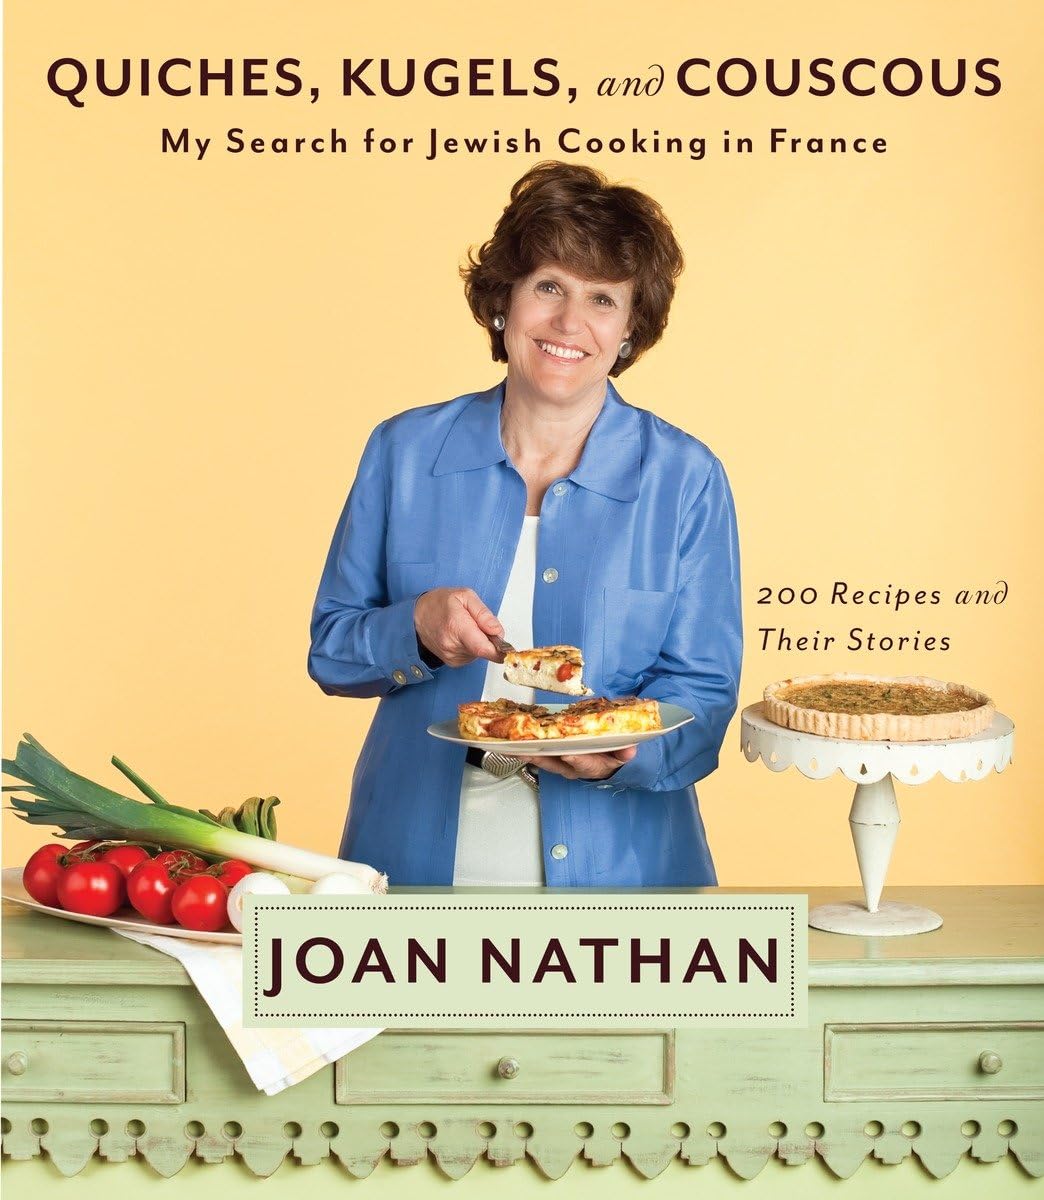 Quiches, Kugels, and Couscous: My Search for Jewish Cooking in France (Joan Nathan) *Signed*